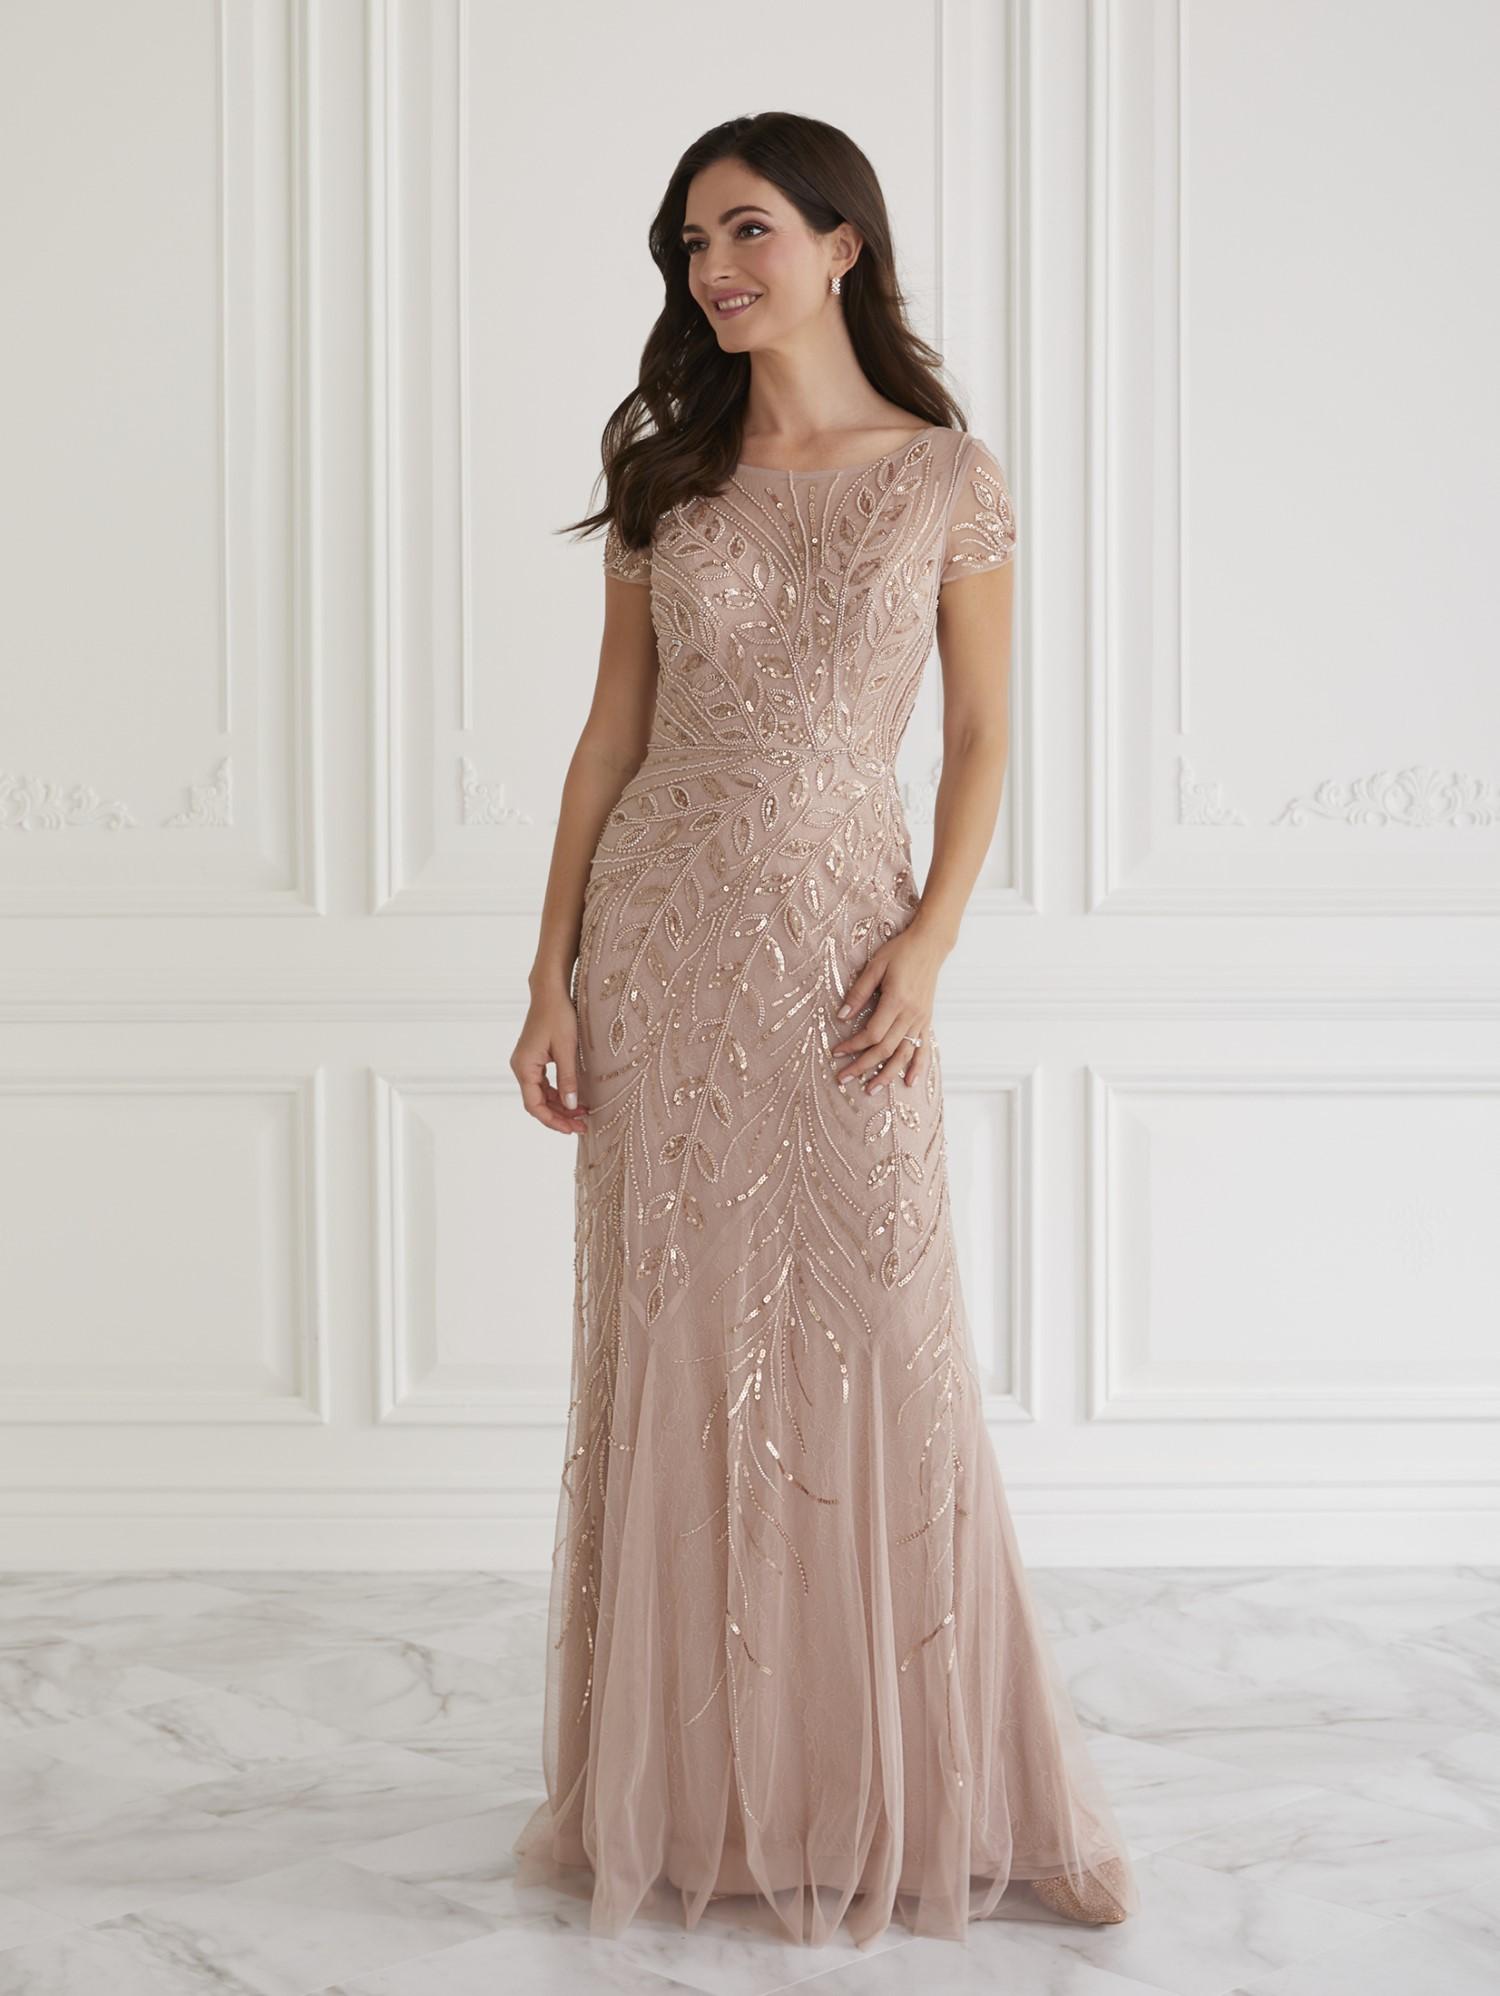 How to Pick the Perfect Mother of the Bride Dress Image